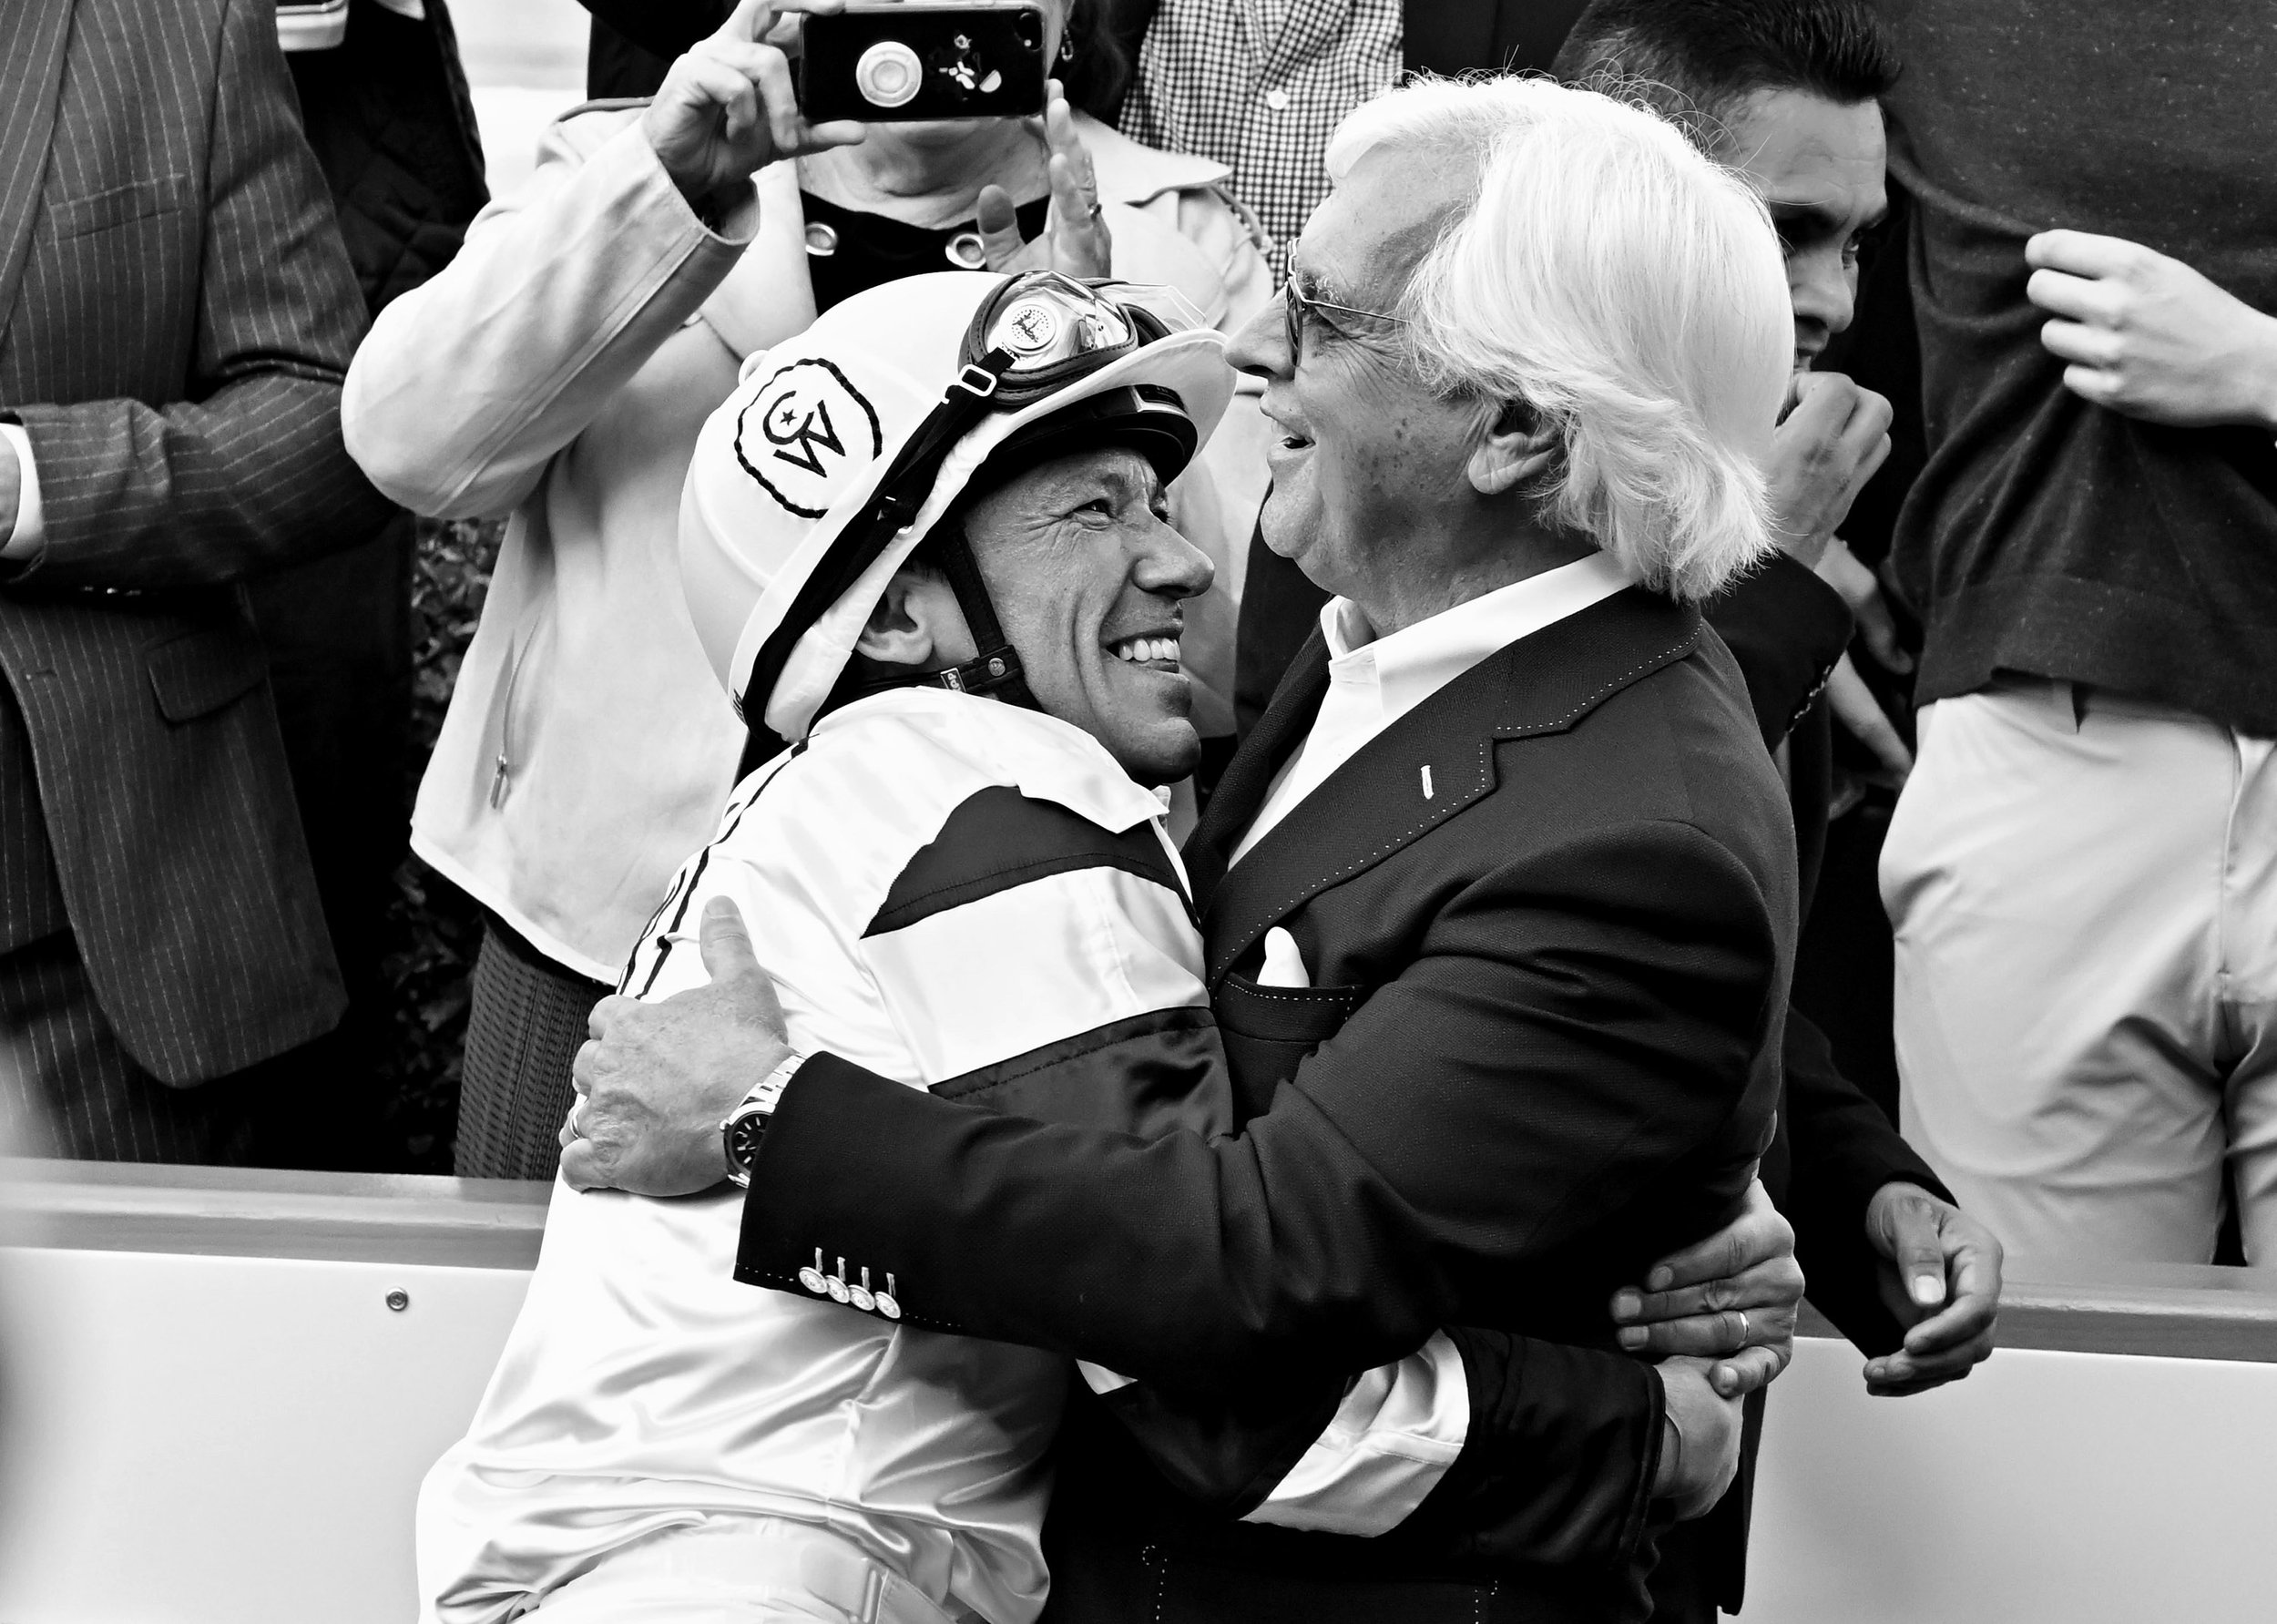  Jockey Lanfranco Dettori, left, hugs trainer Bob Baffert after riding Country Grammer and winning the San Antonio Stakes (Grade II) race during Opening day of the winter-spring meet at Santa Anita Park in Arcadia on Monday, December 26, 2022.  